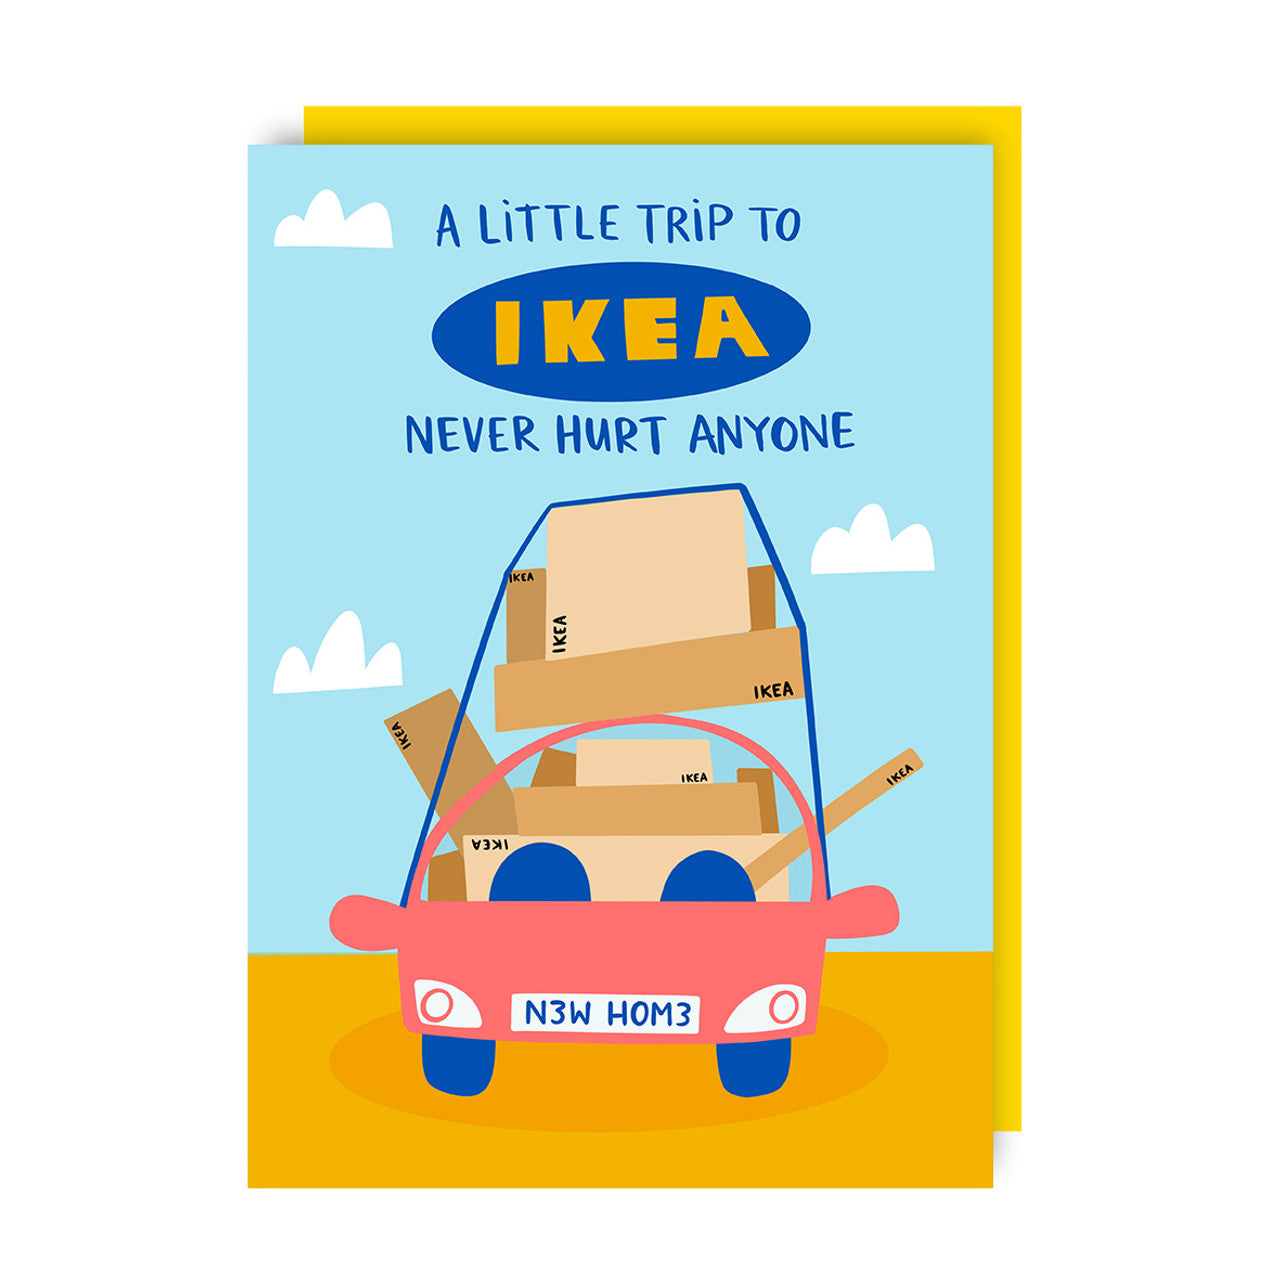 New Home Card text reads "A little trip to Ikea never hurt anyone"